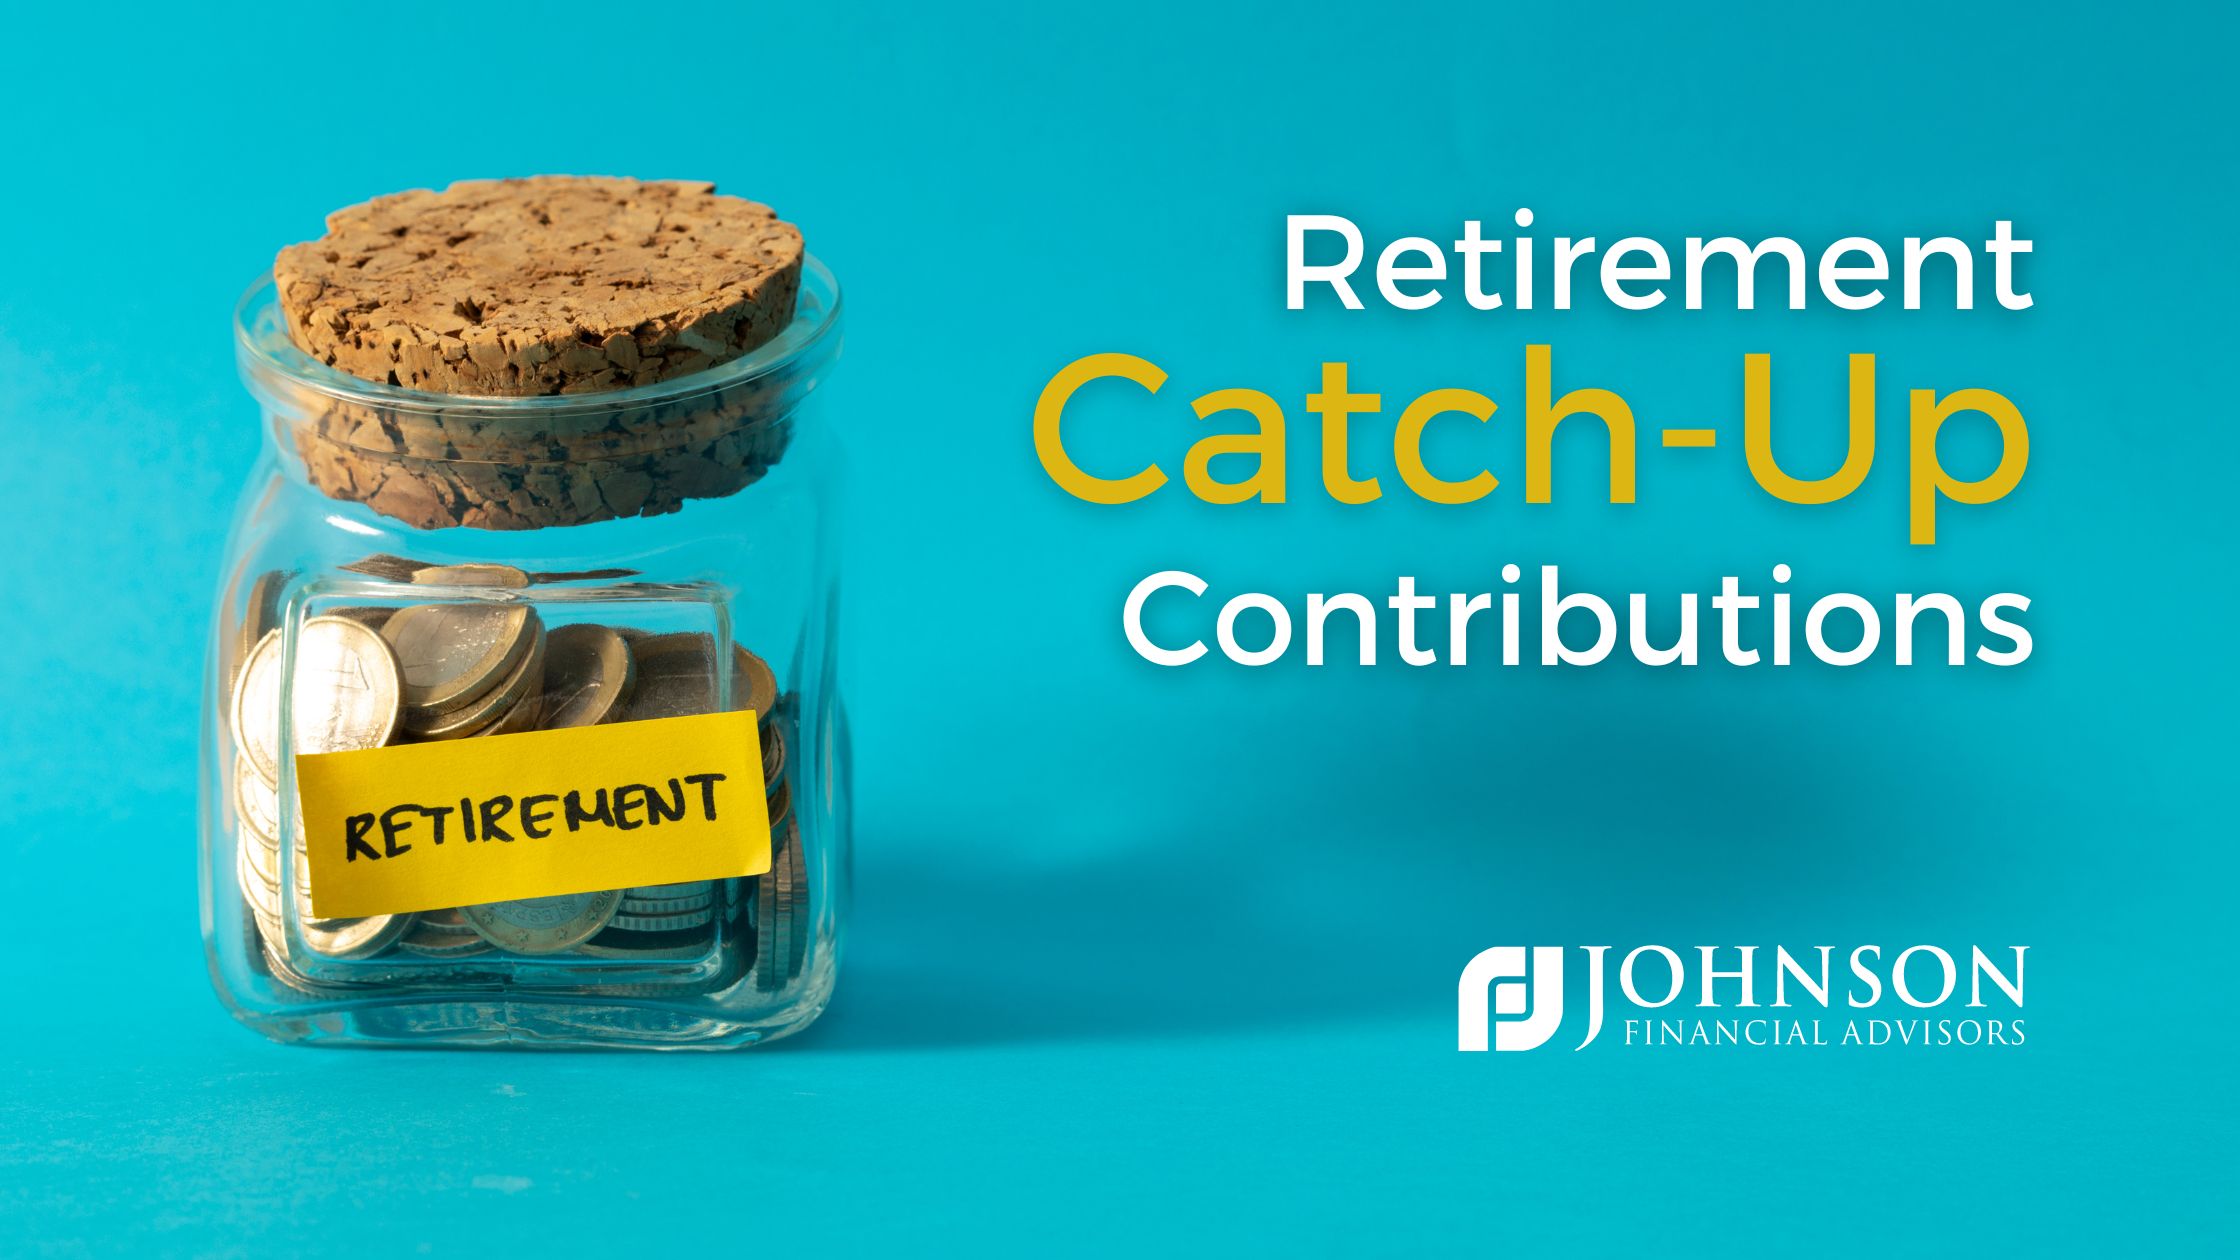 CatchUp Contributions How They Can Help Boost Retirement Savings